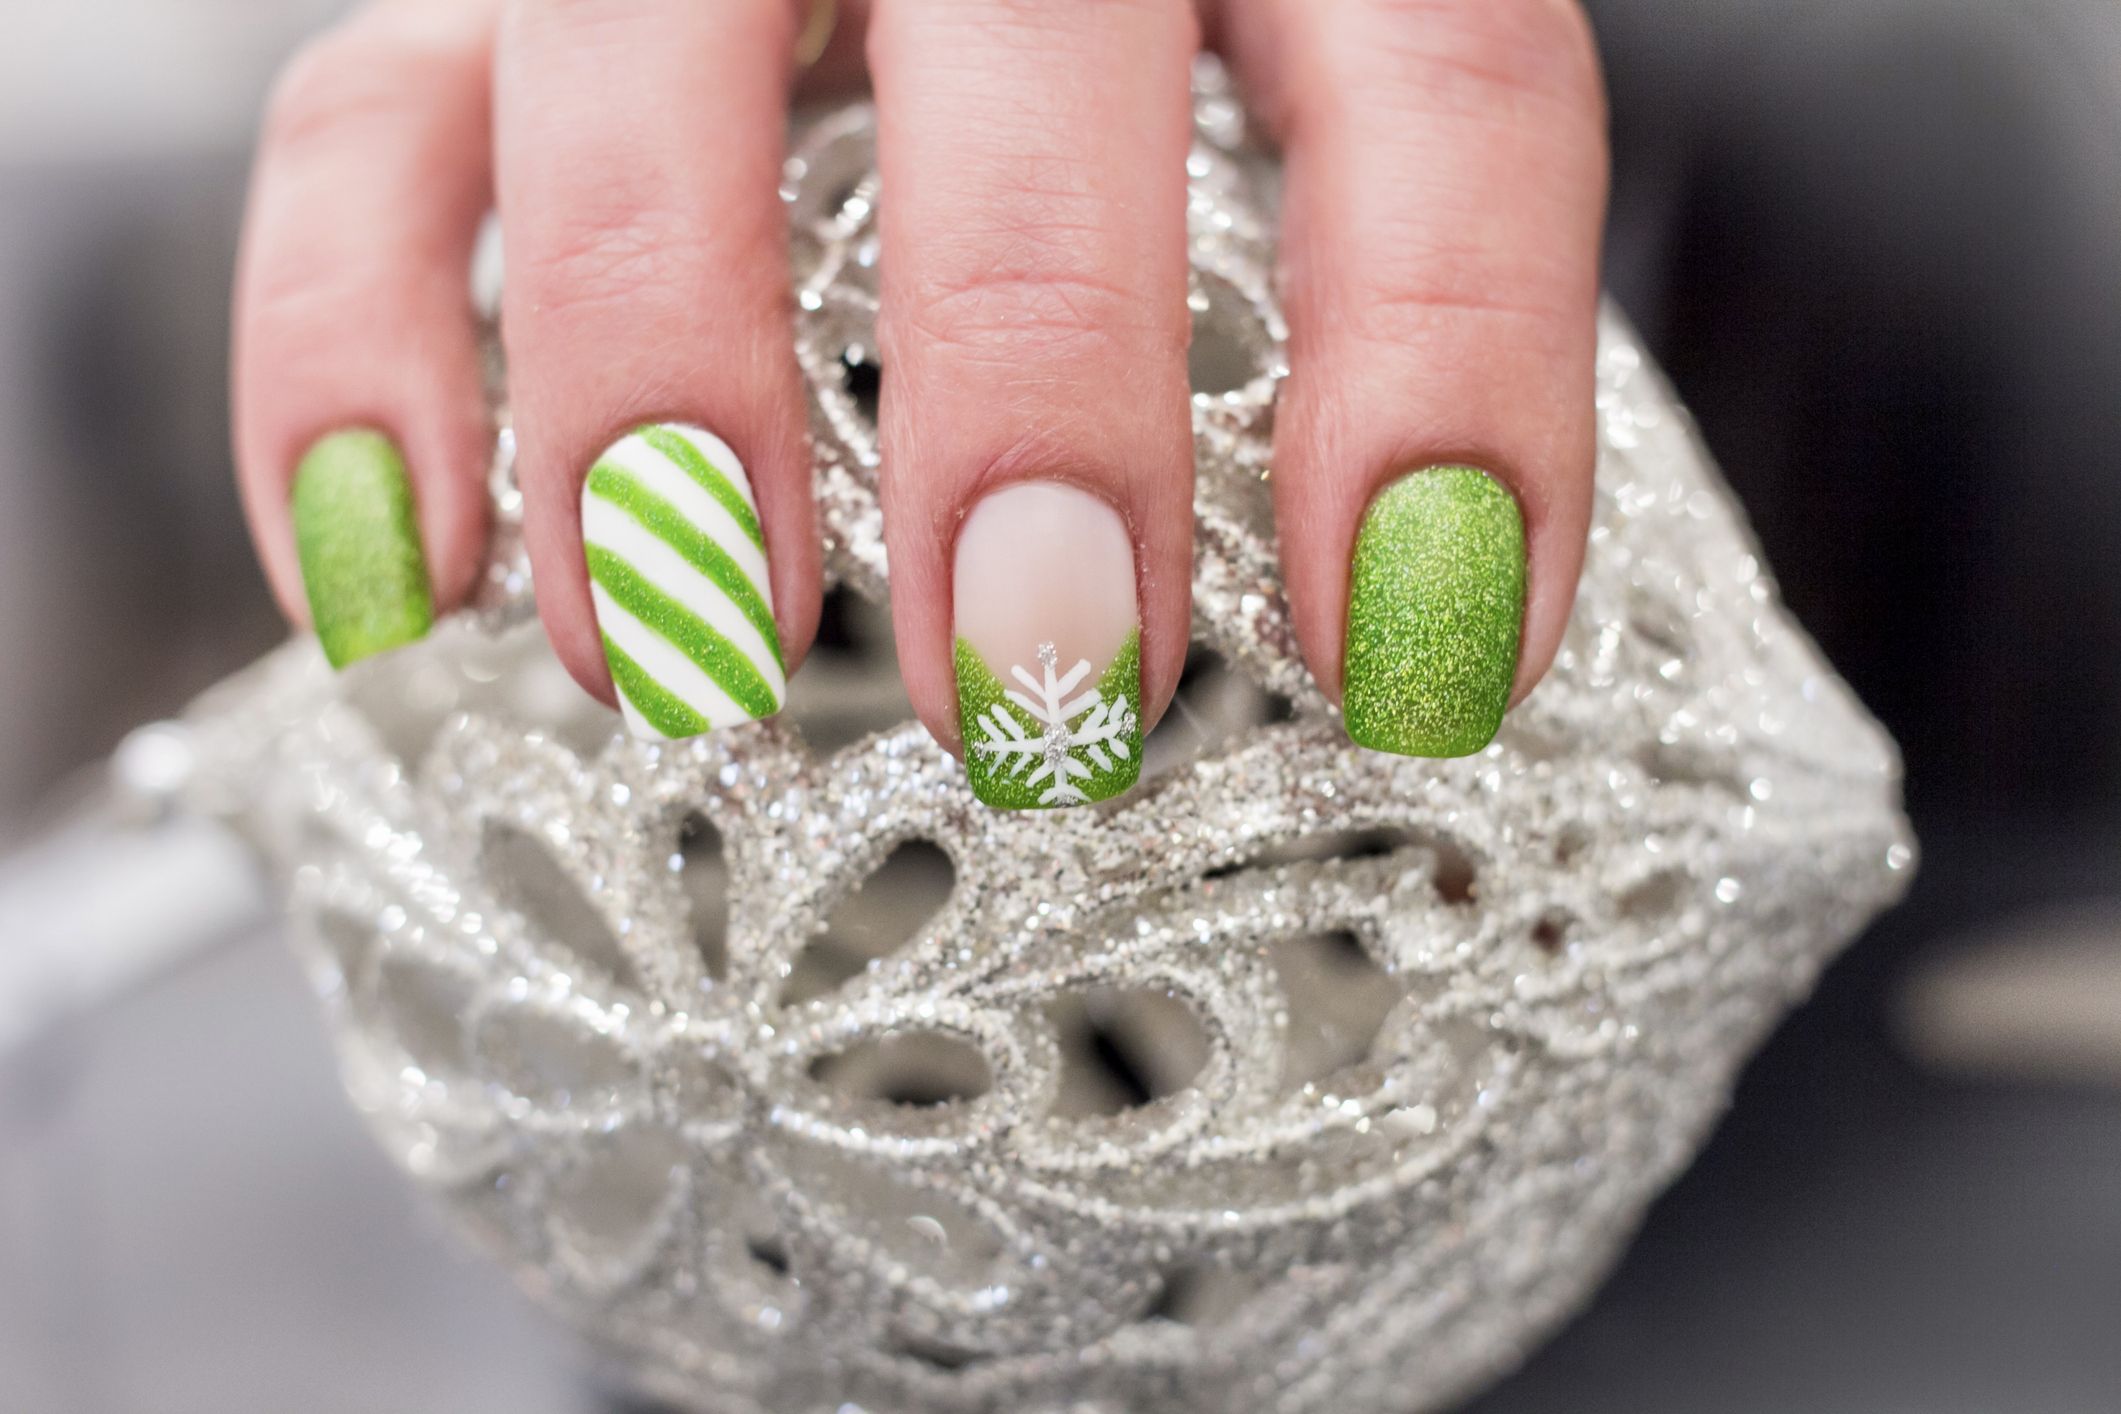 Get Festive with White Christmas Nails + Glitter: A Sparkling Holiday Look